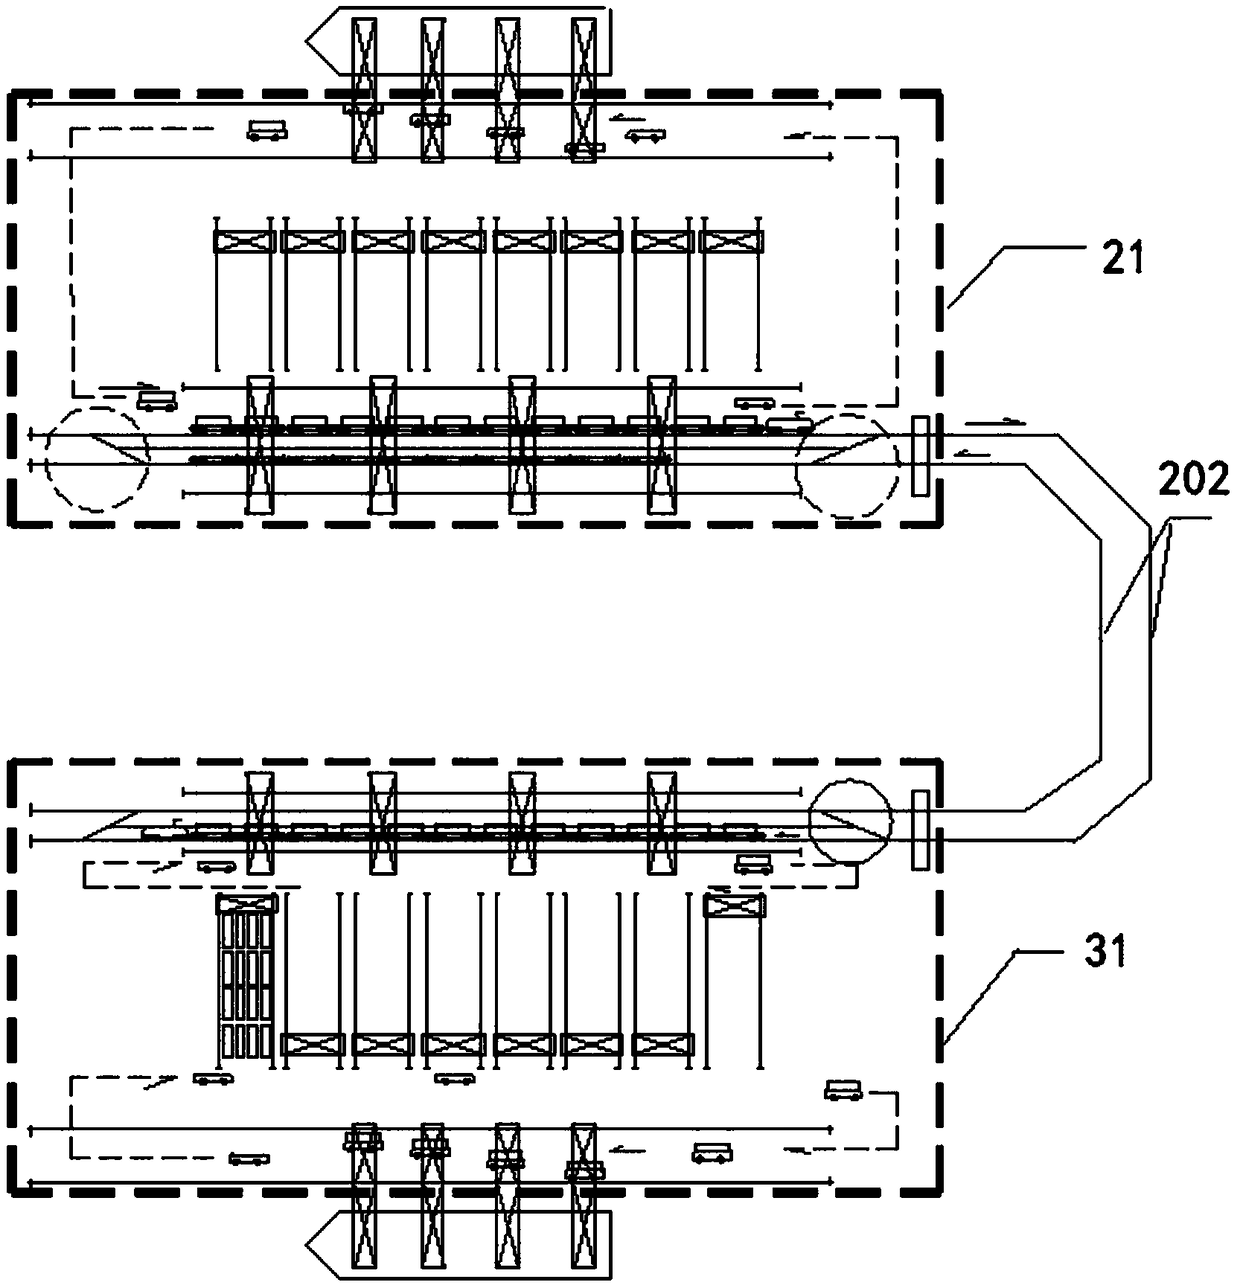 Container transportation system and method based on river and ocean combined transportation